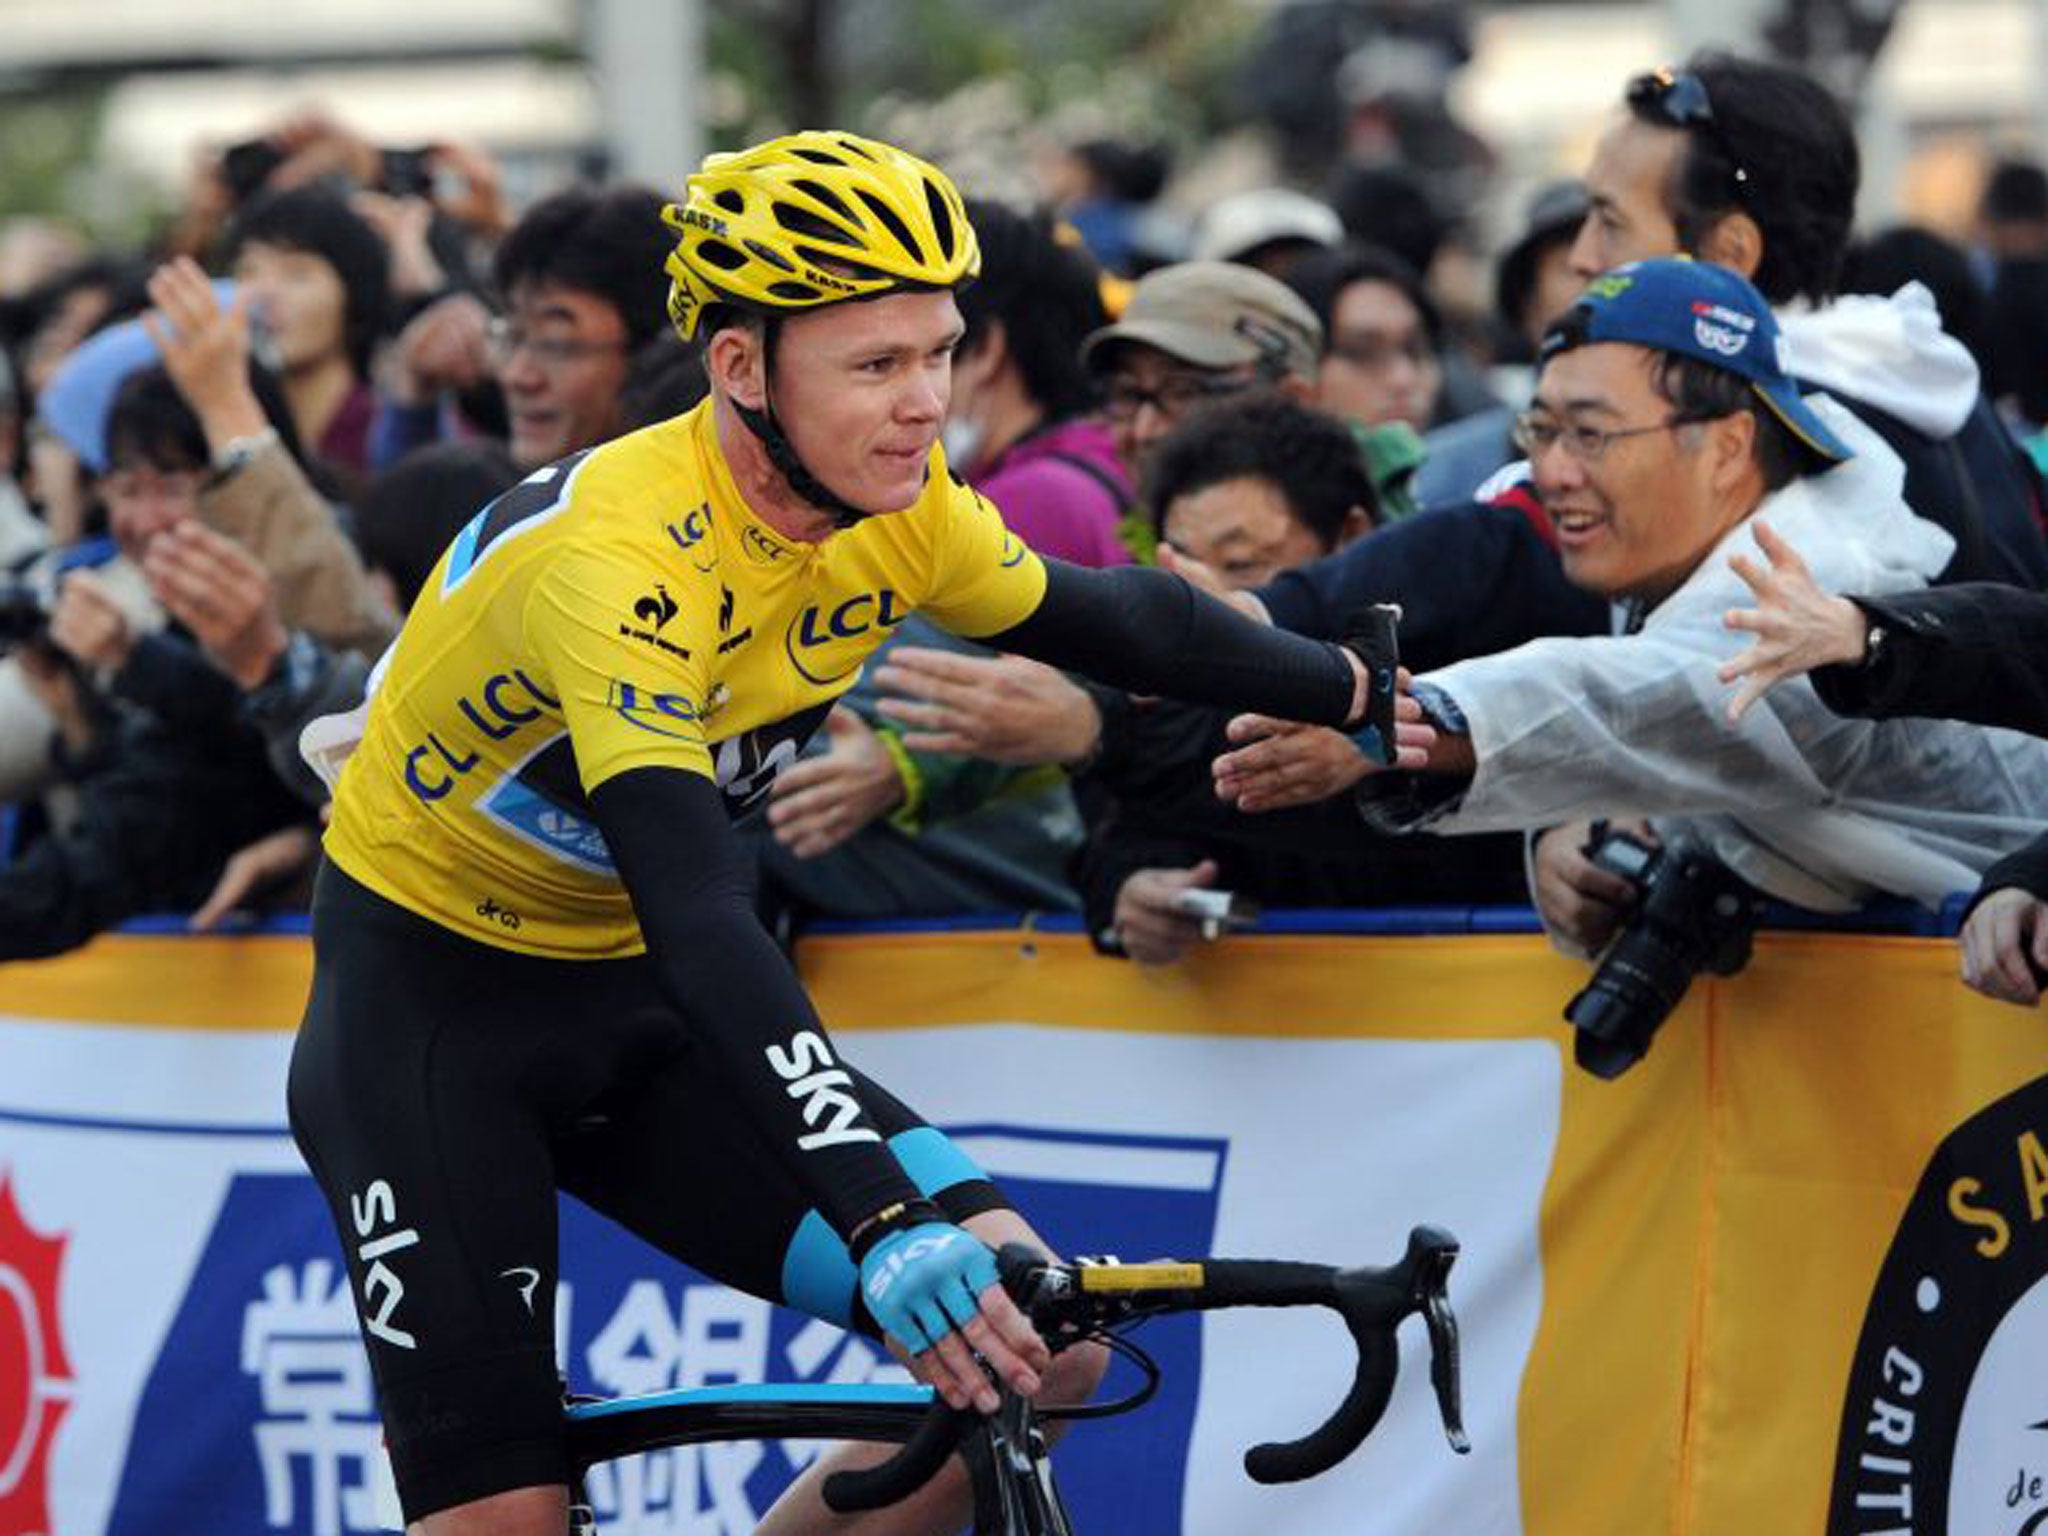 Chris Froome greets the fans after winning in Saitama